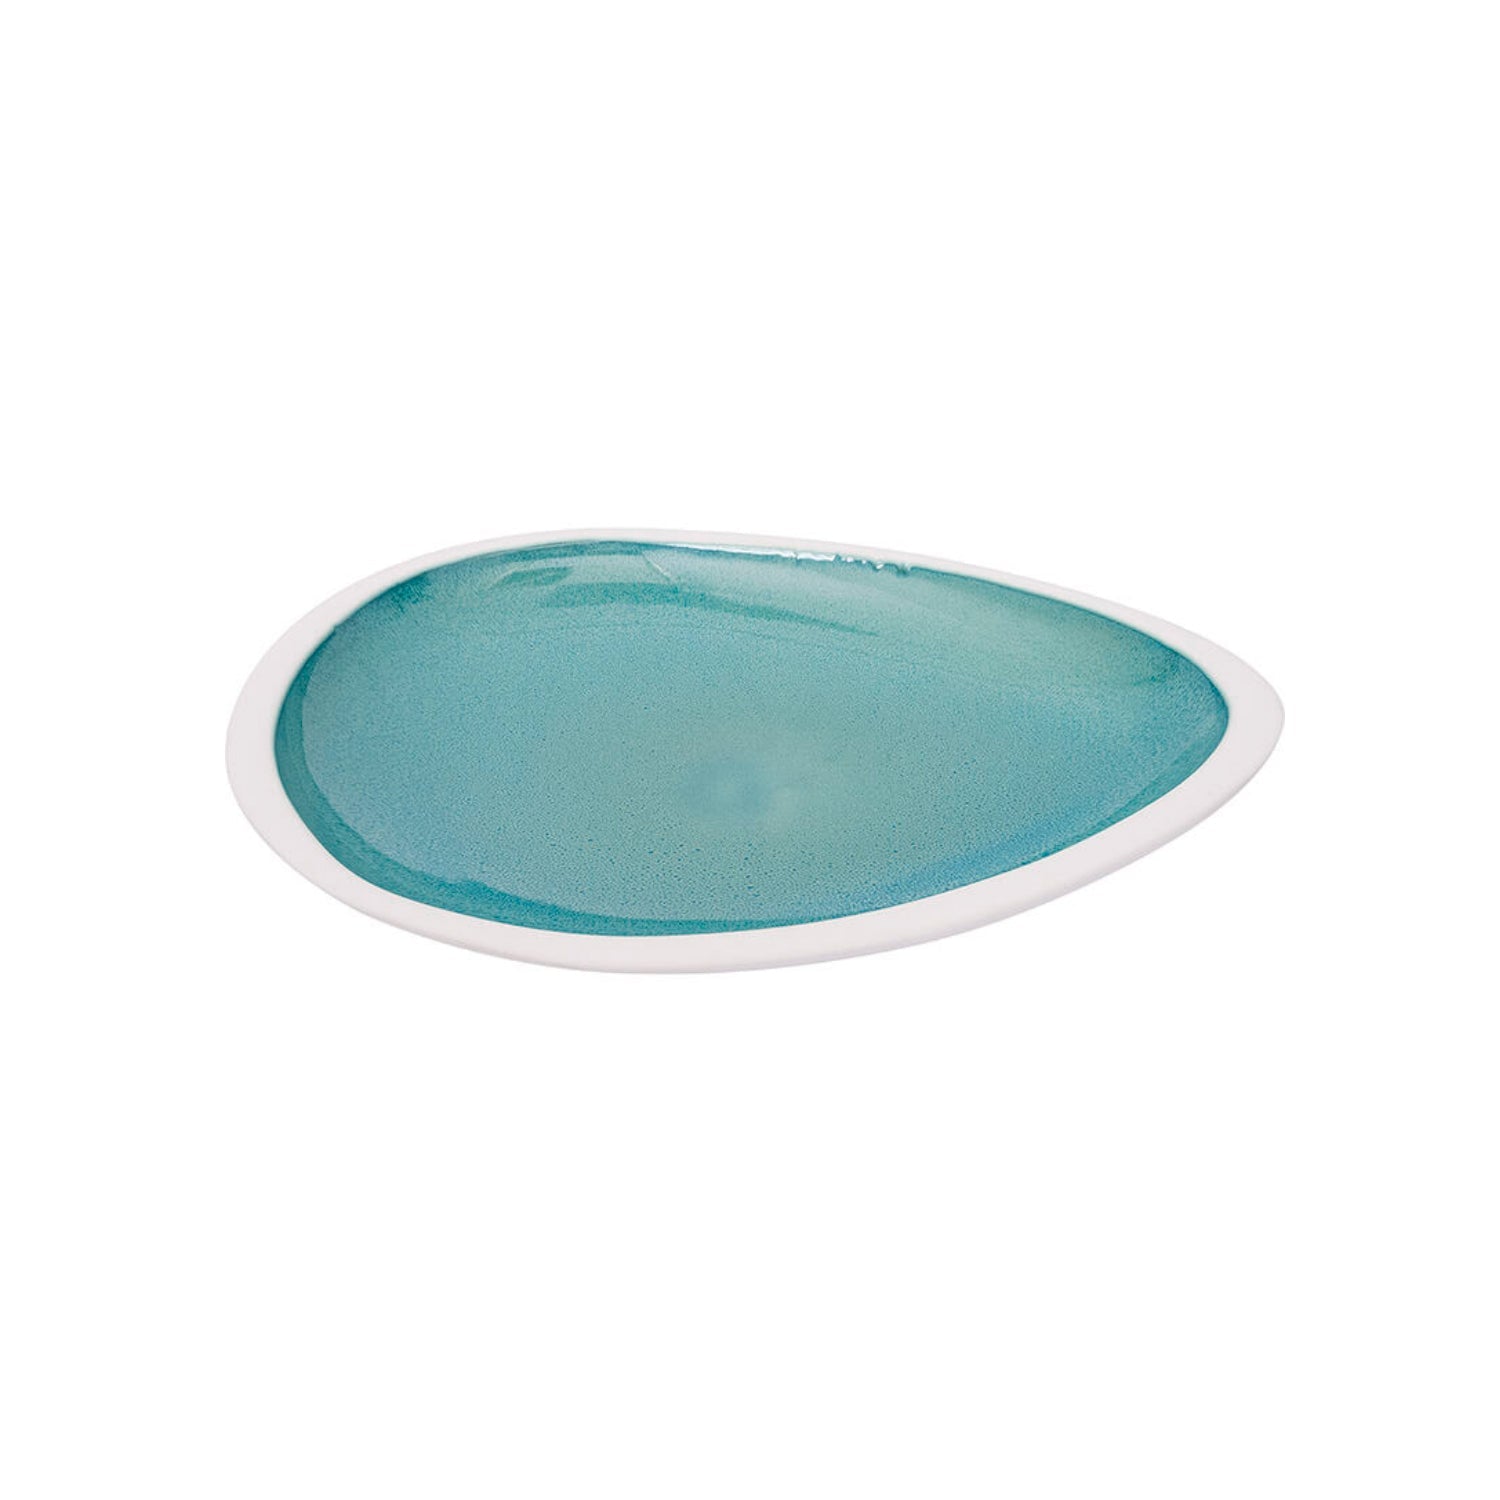 LARGE TURQUOISE OVAL TRAY